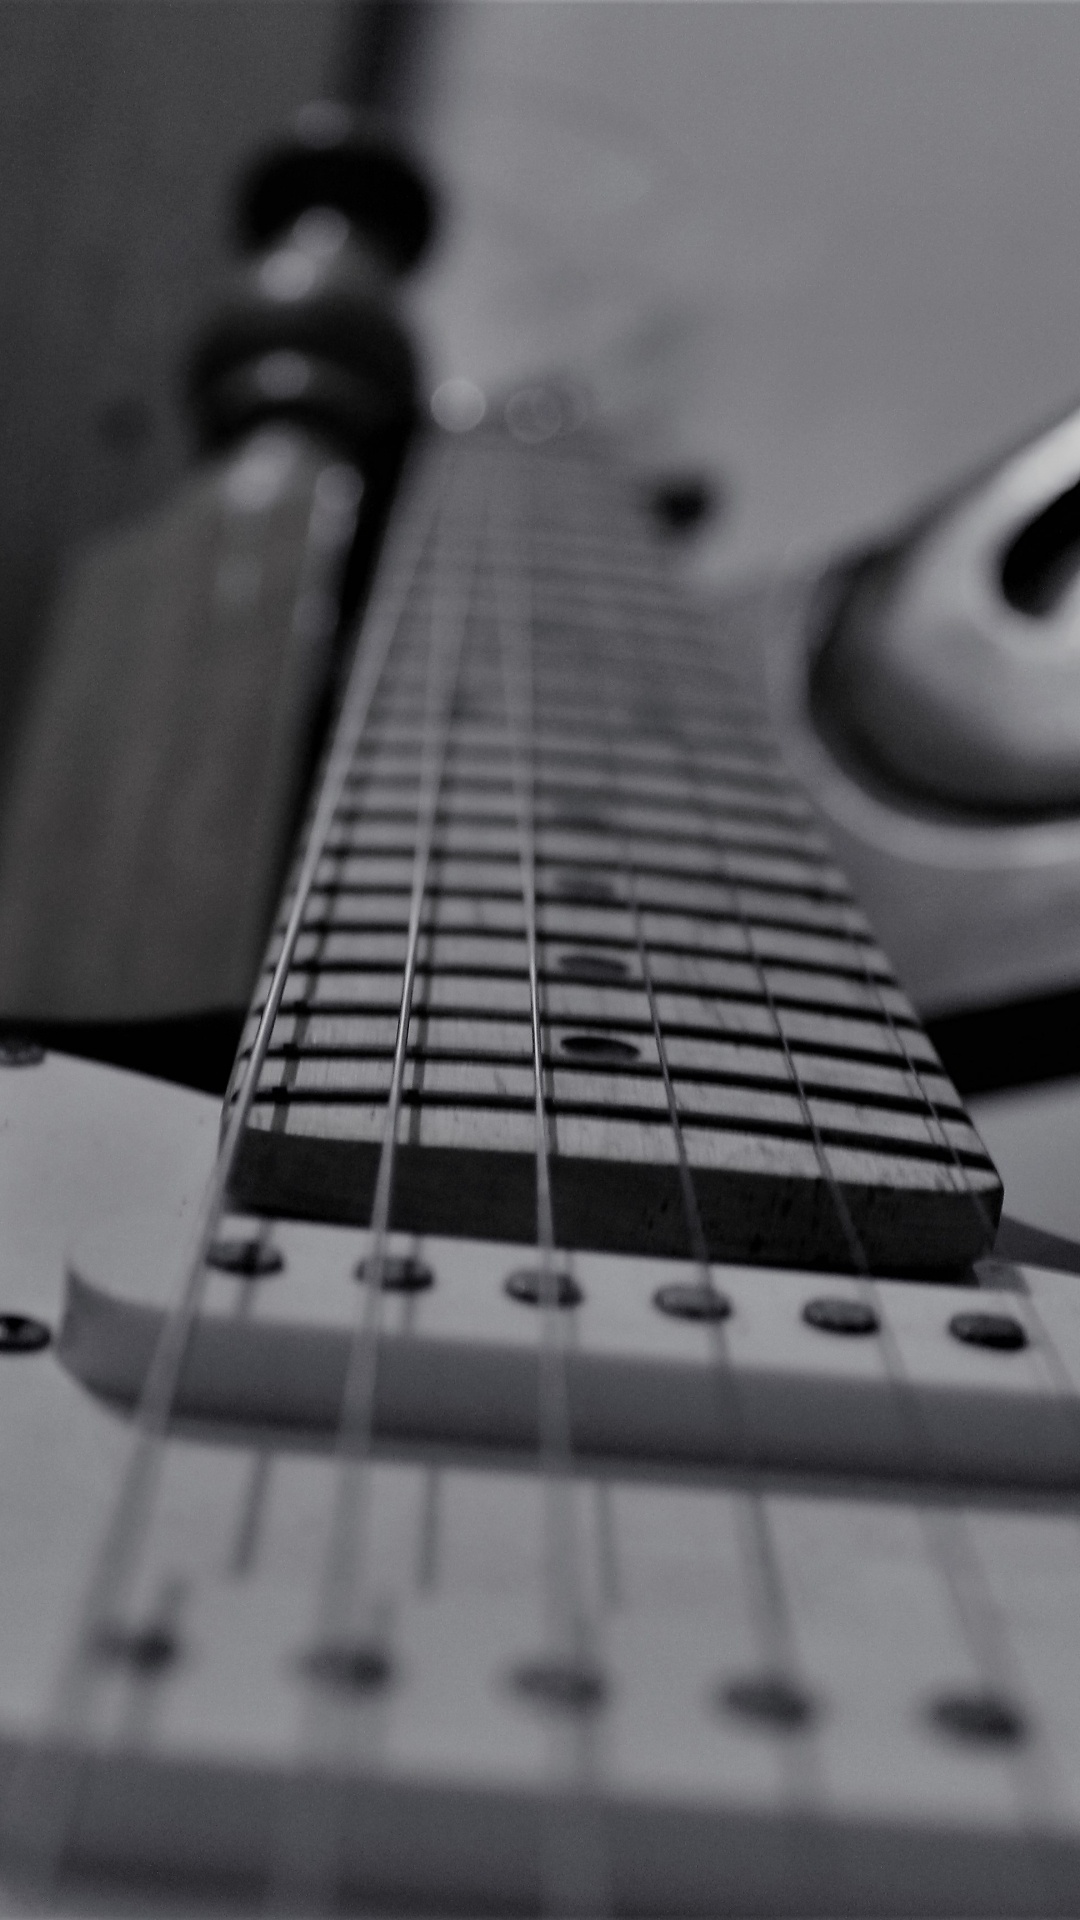 Bass Guitar, Black and White, Electric Guitar, Guitar, String Instrument. Wallpaper in 1080x1920 Resolution